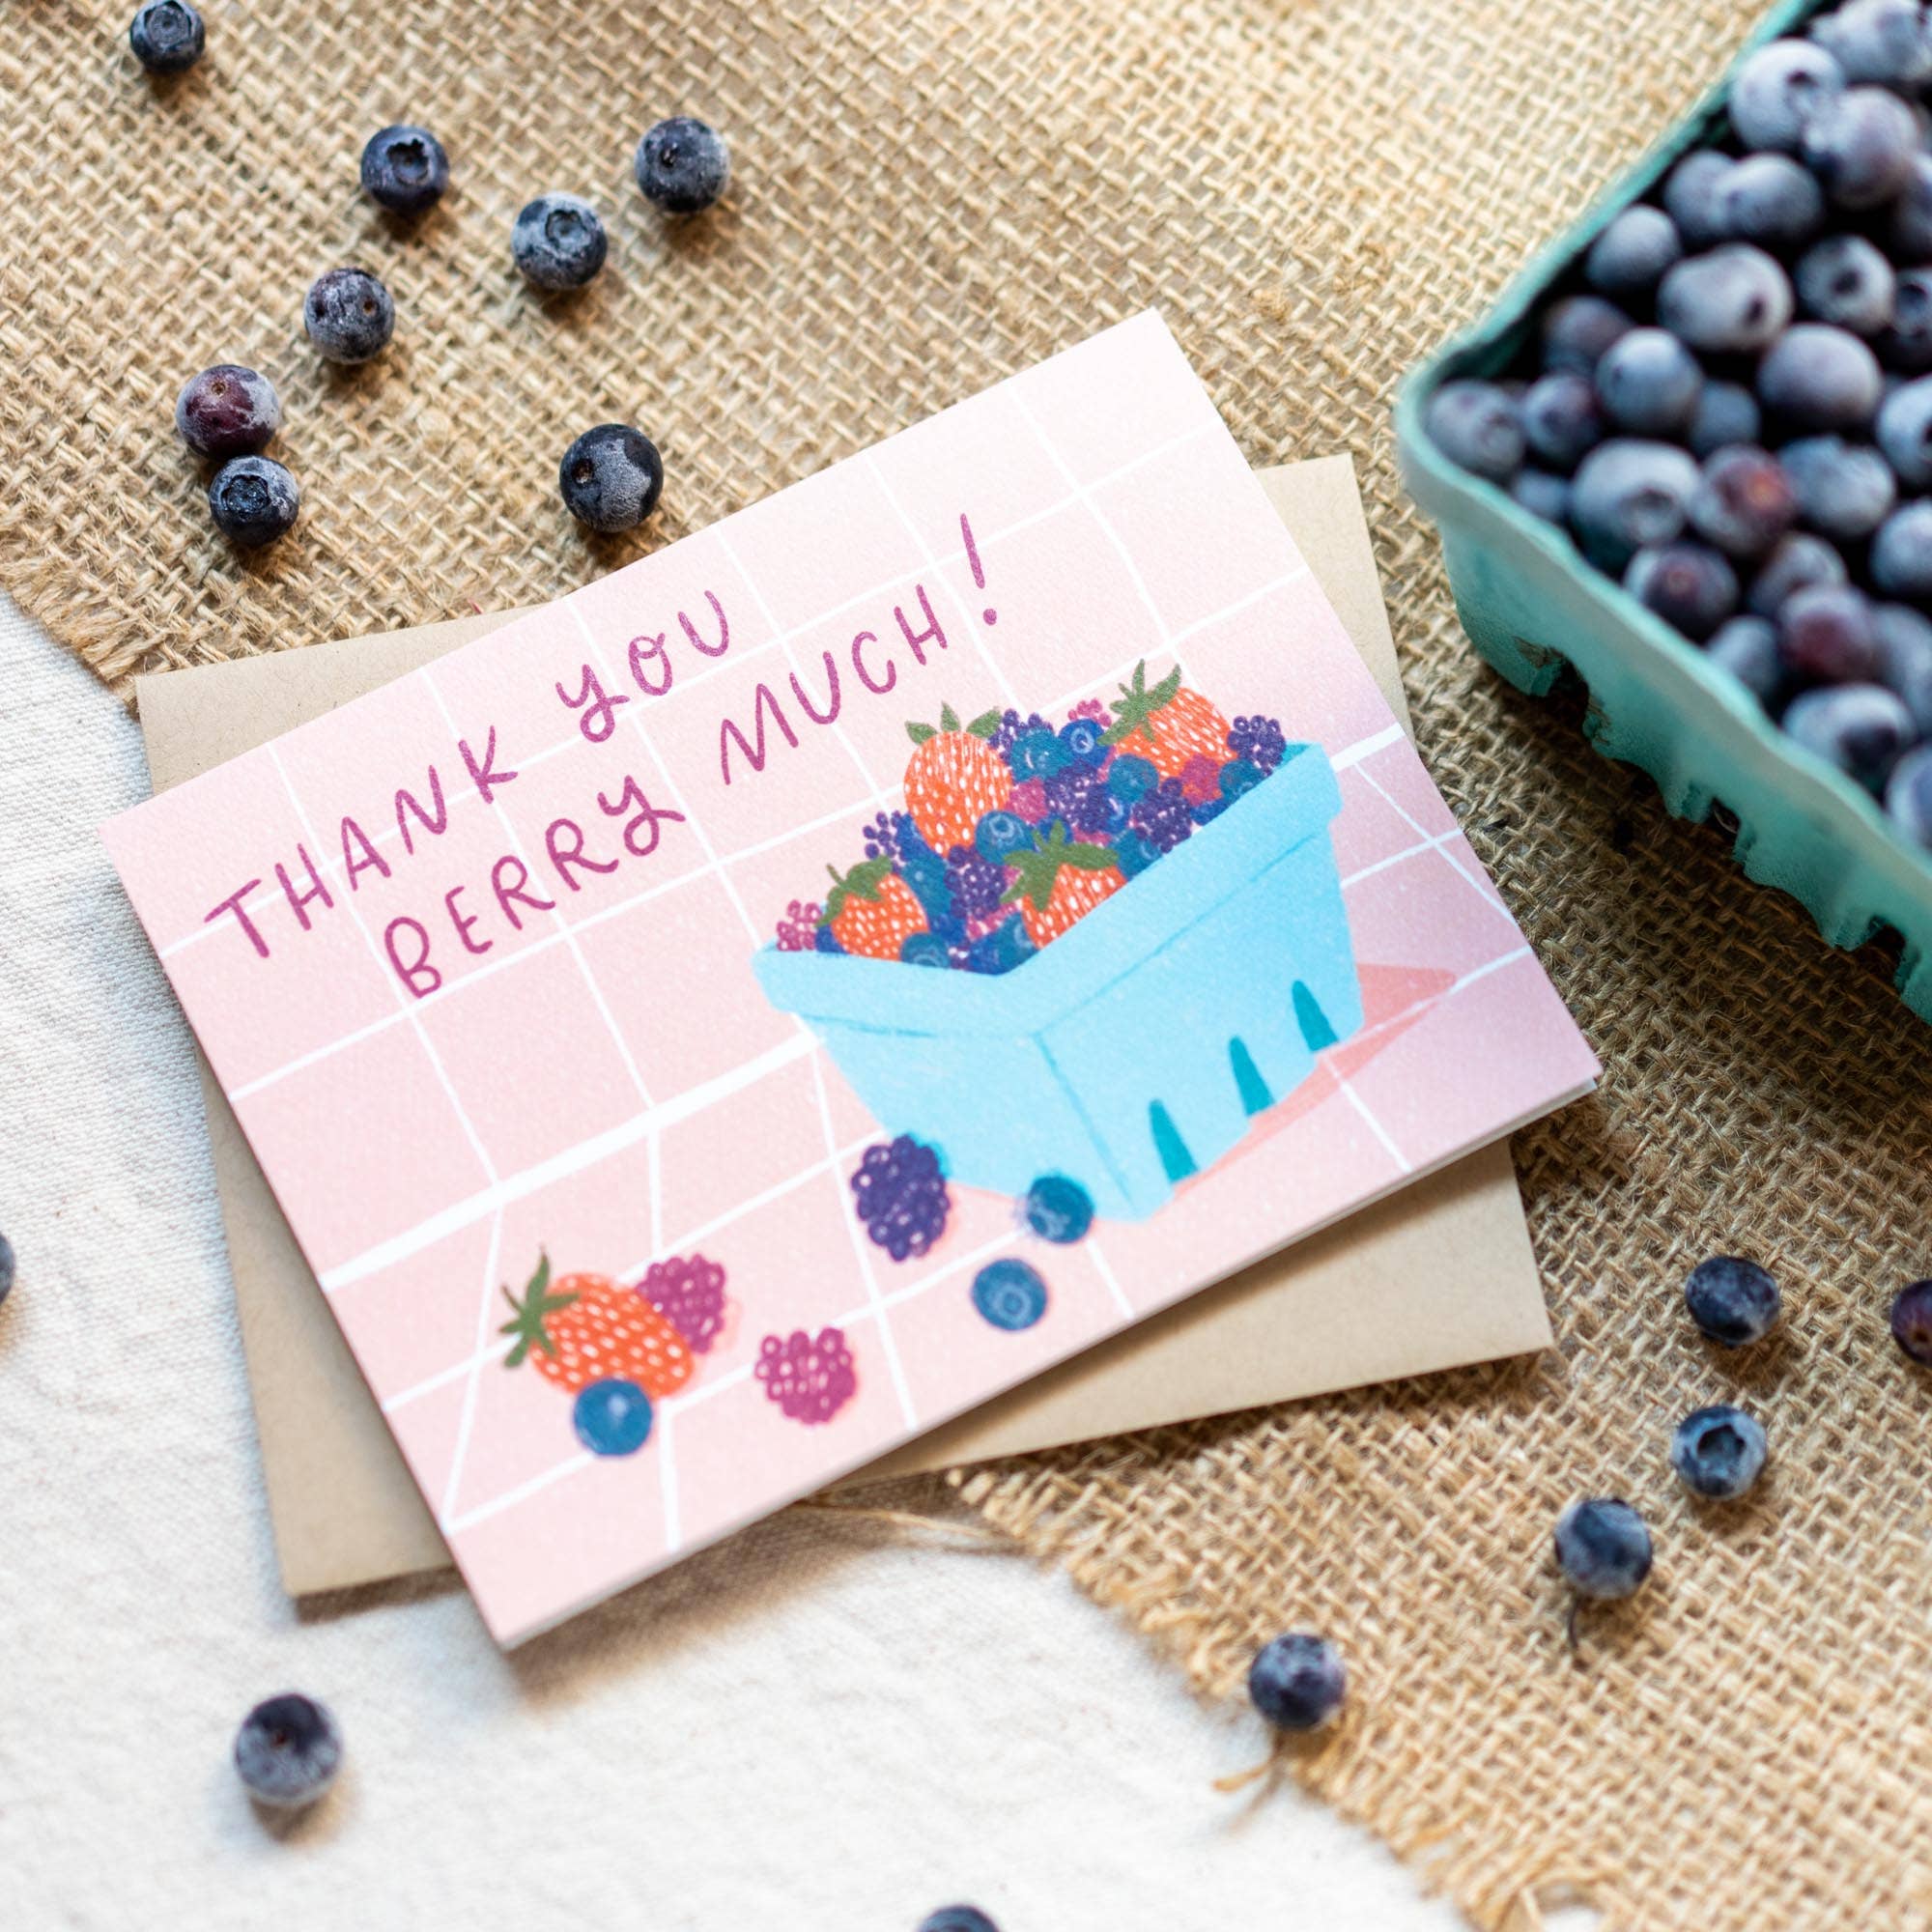 Thank You Berry Much Hand Drawn Greeting Card